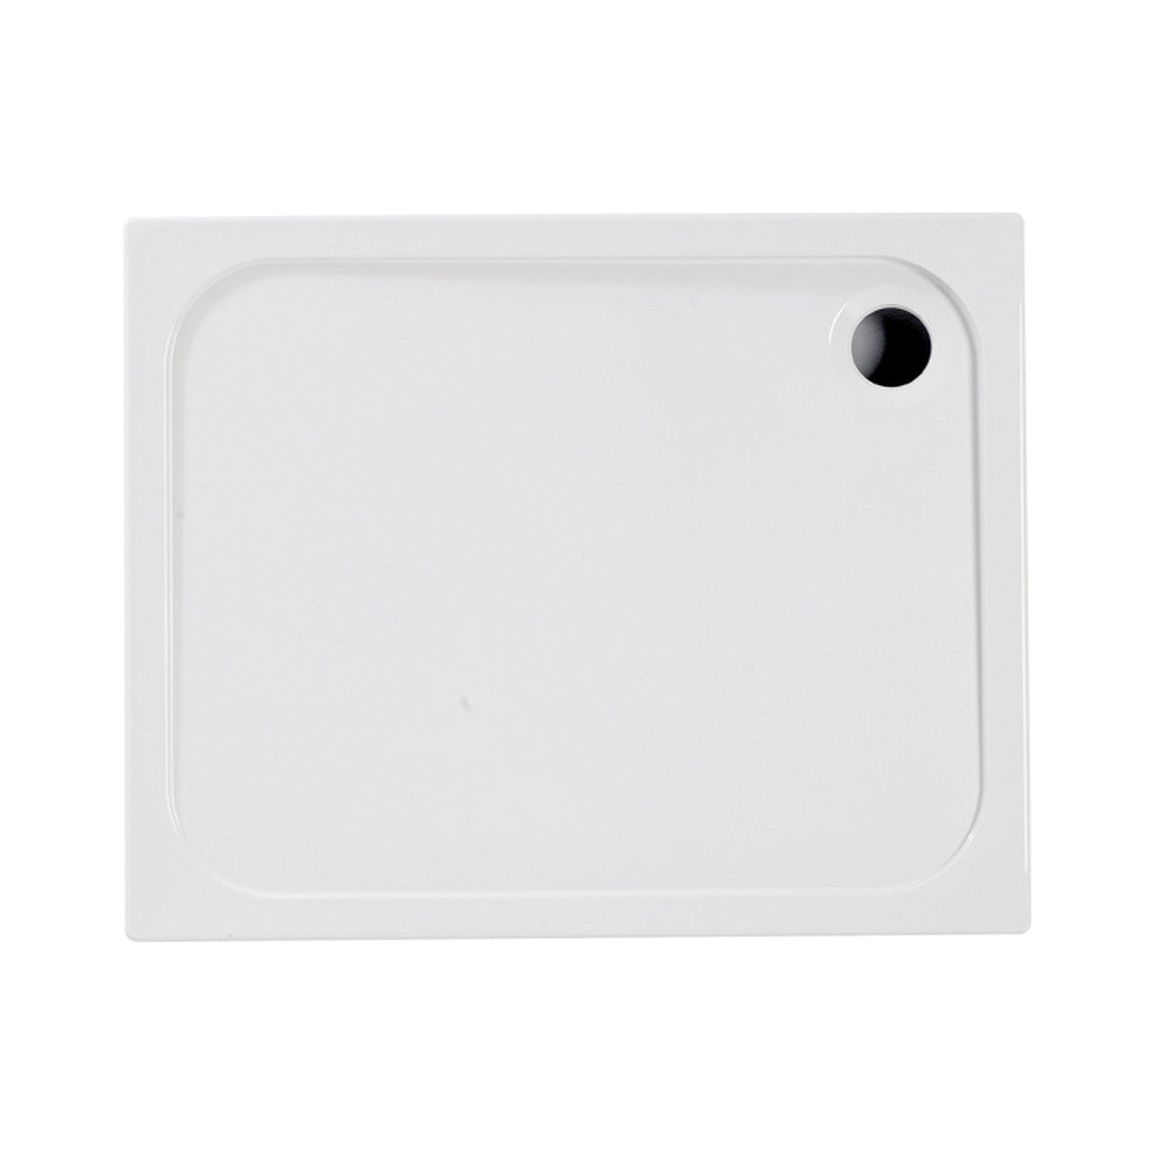 45mm Low Profile 1200x900mm Rectangular Tray & Waste